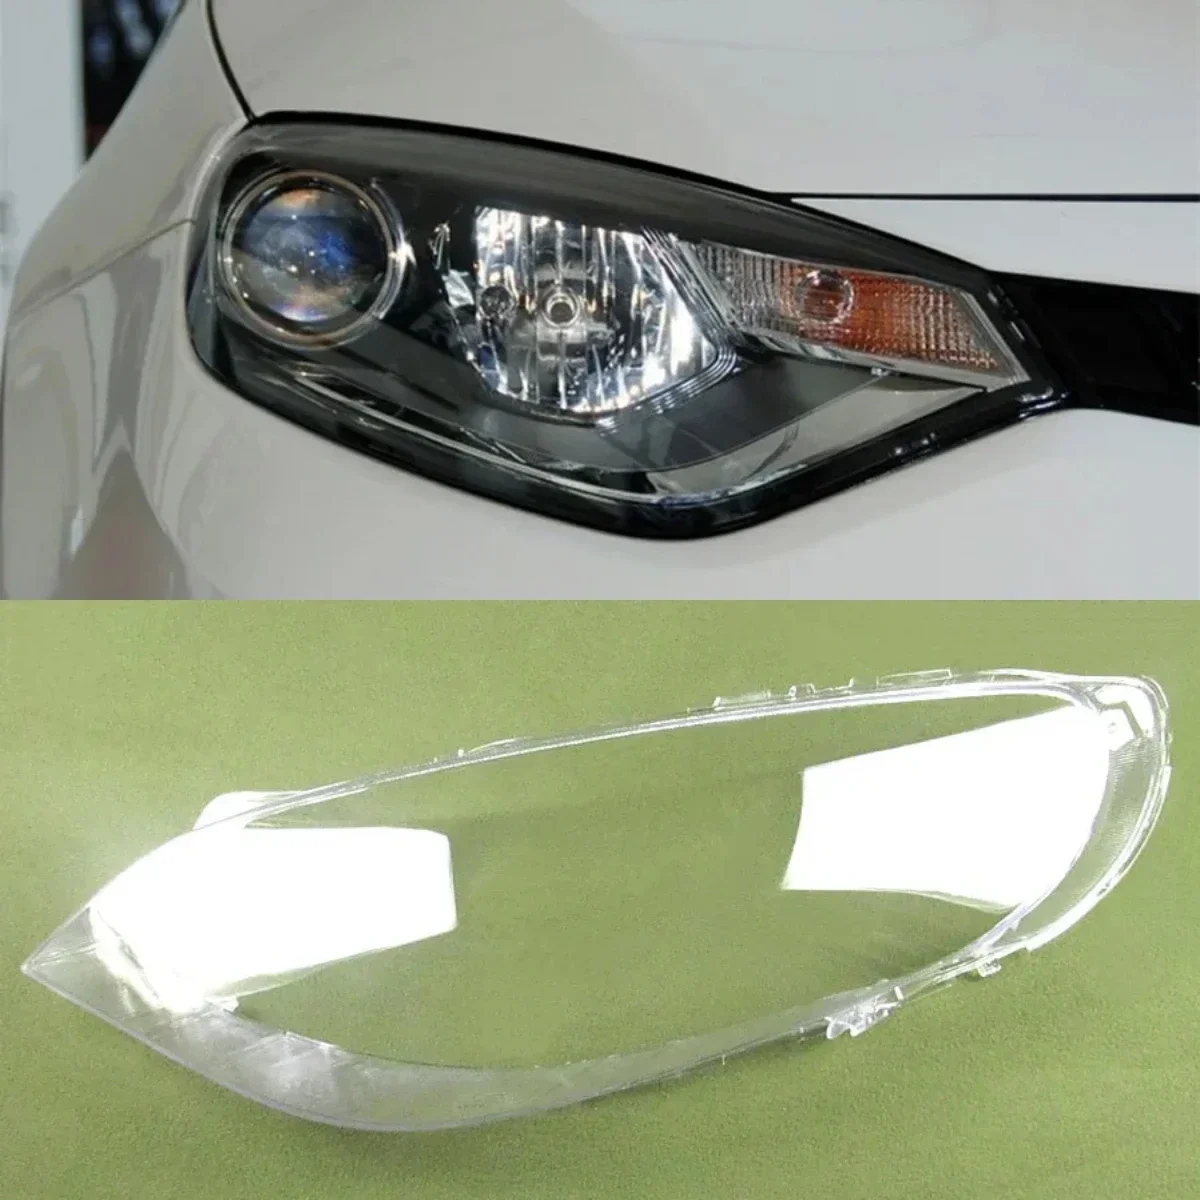 

For MG 6 MG6 Headlamp Shell Transparent Lamp Shade Front Headlight Cover Replace Original Lampshade Plexiglass 2010 2011 - 2015